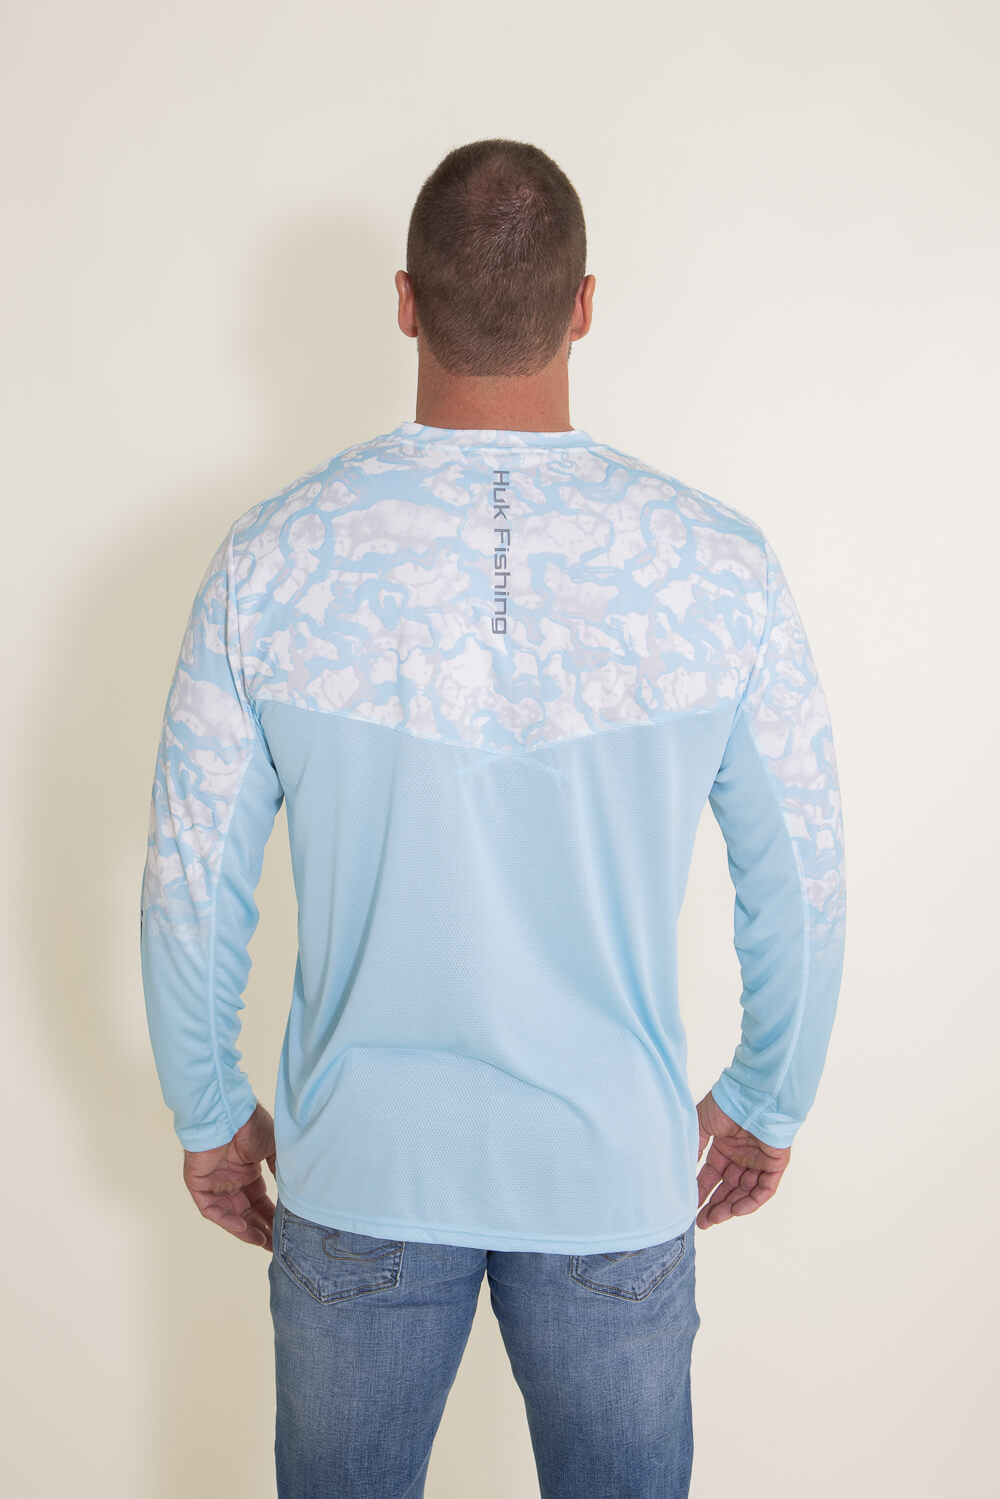 Huk Fishing Icon X Inside Reef Long Sleeve T-Shirt for Men in Blue